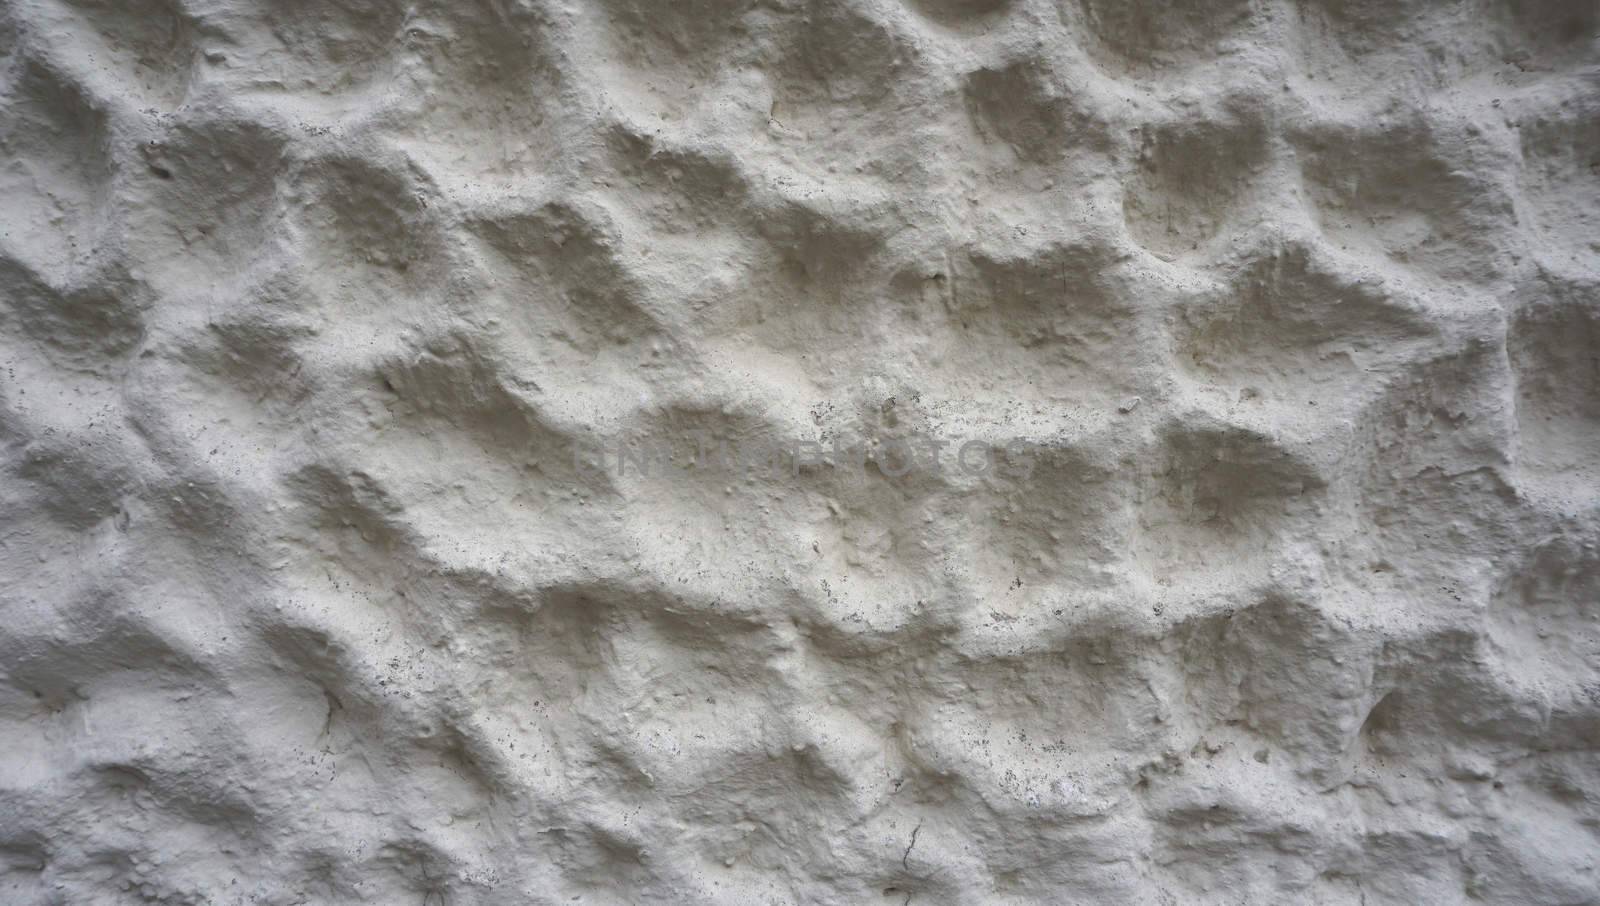 bubble texture on white cement wall finishing horizontal by polarbearstudio